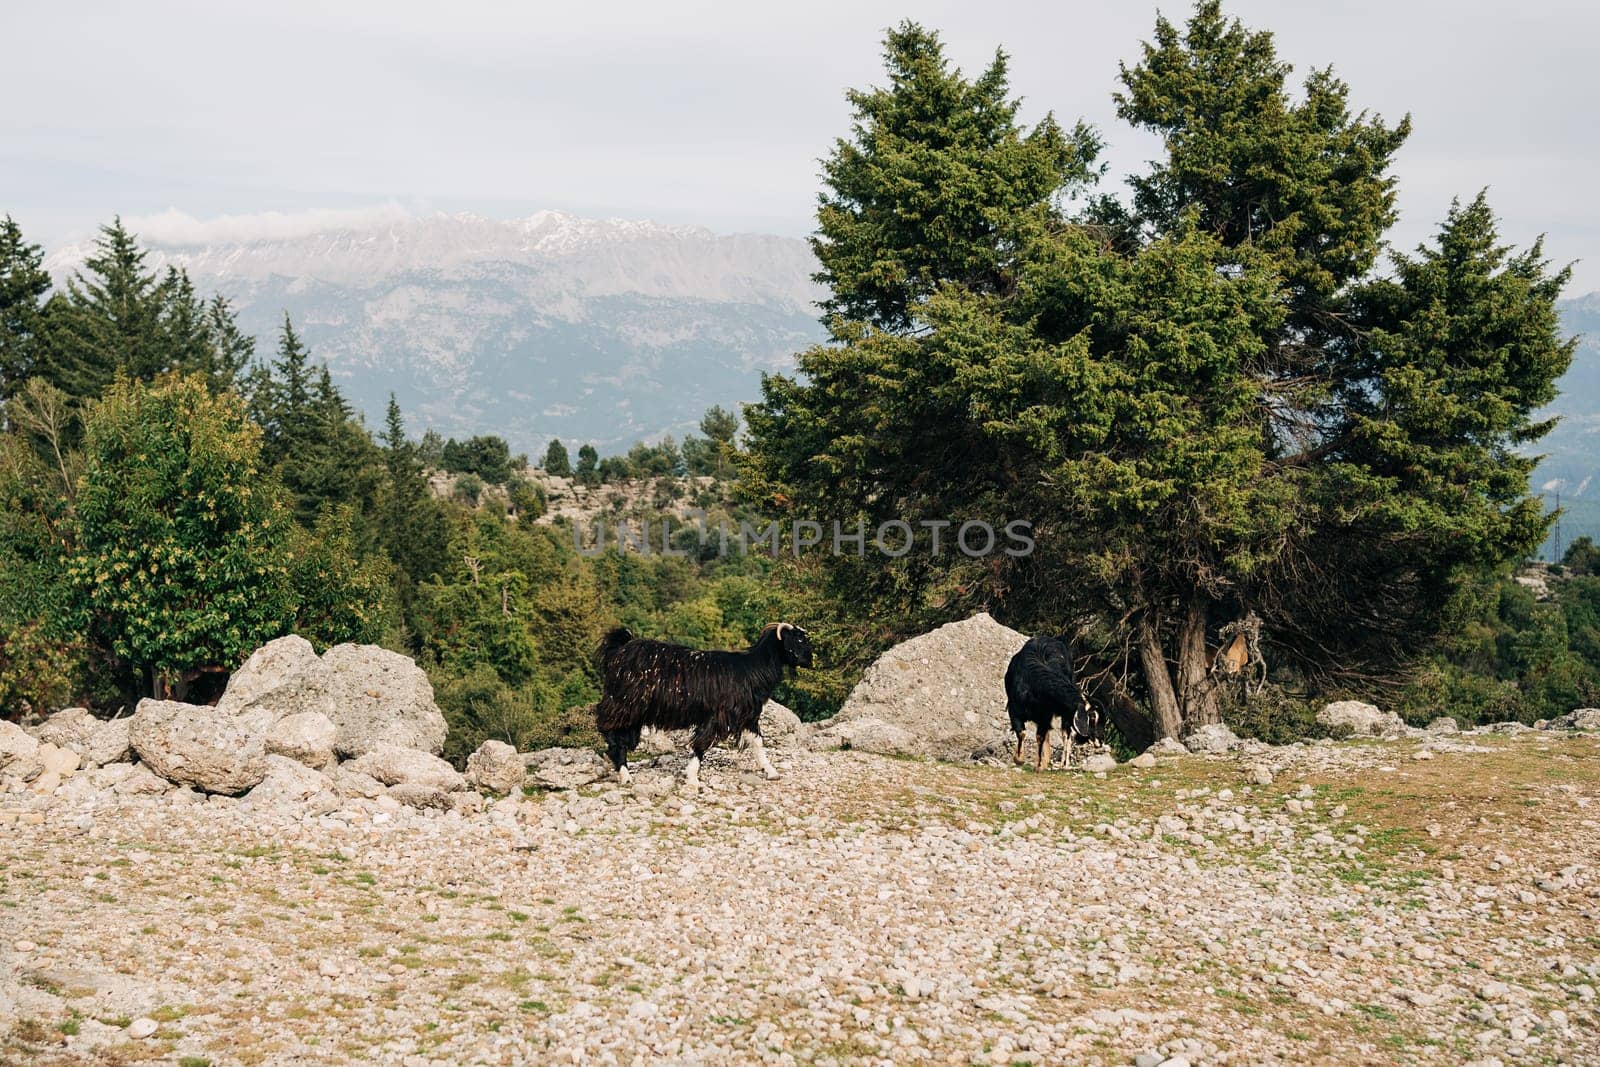 A scenic city park landscape view of a mountain, green forest, black goats. and dirt road under cloudy sky in changeable weather. Black goats eating grass.